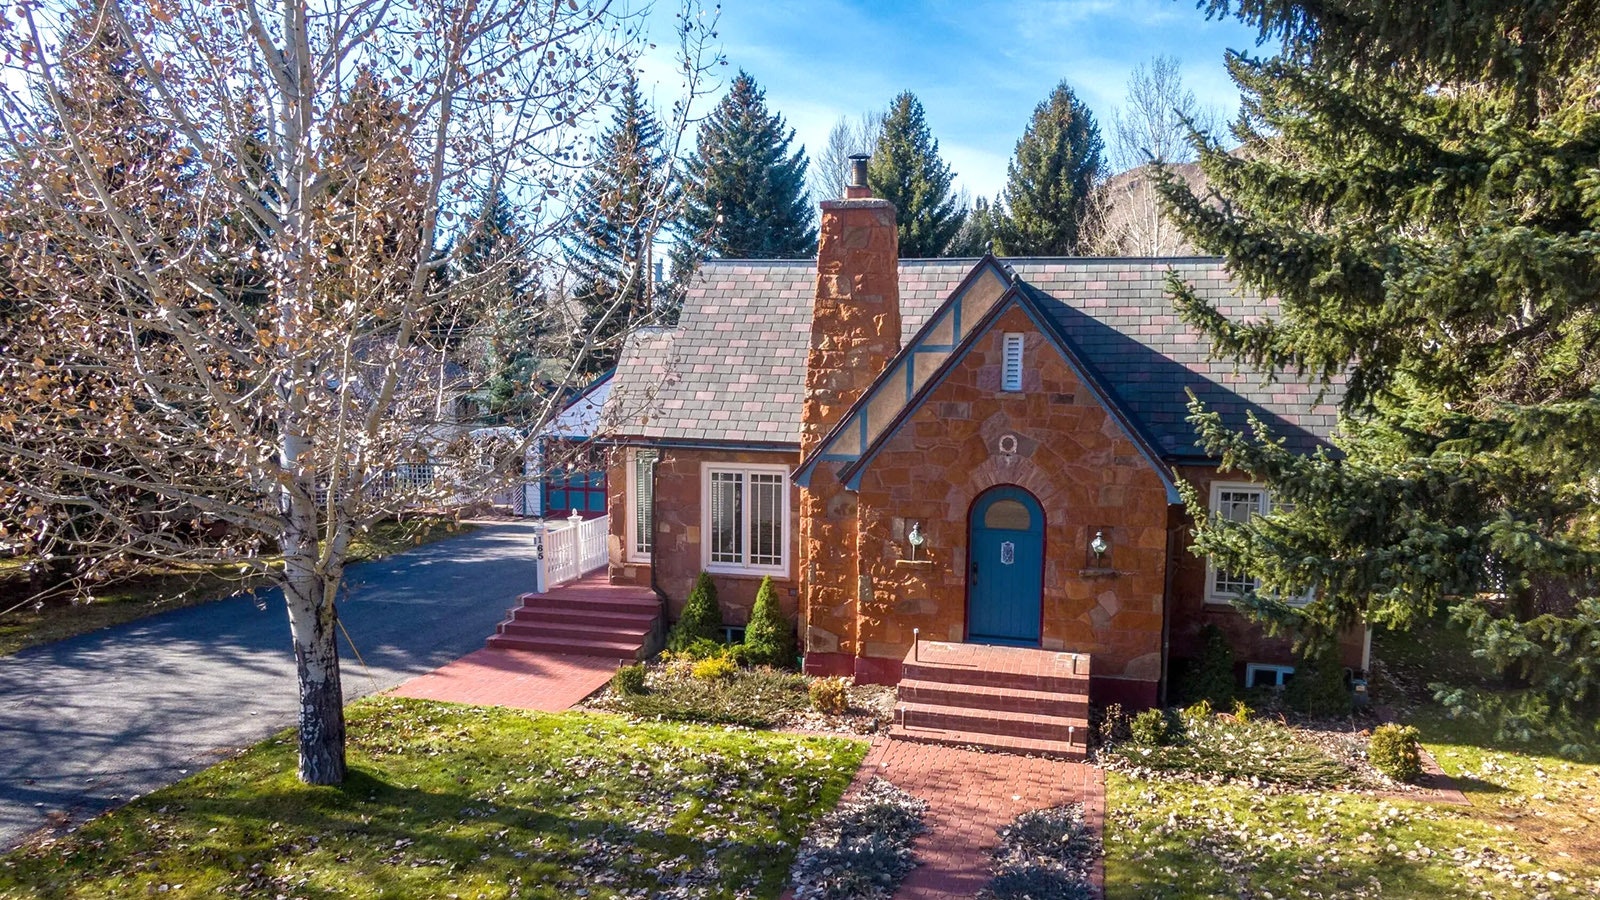 This 1,000-square-foot home in downtown Jackson, Wyoming, lists for $4 million. Its real value, however, is its land and location.